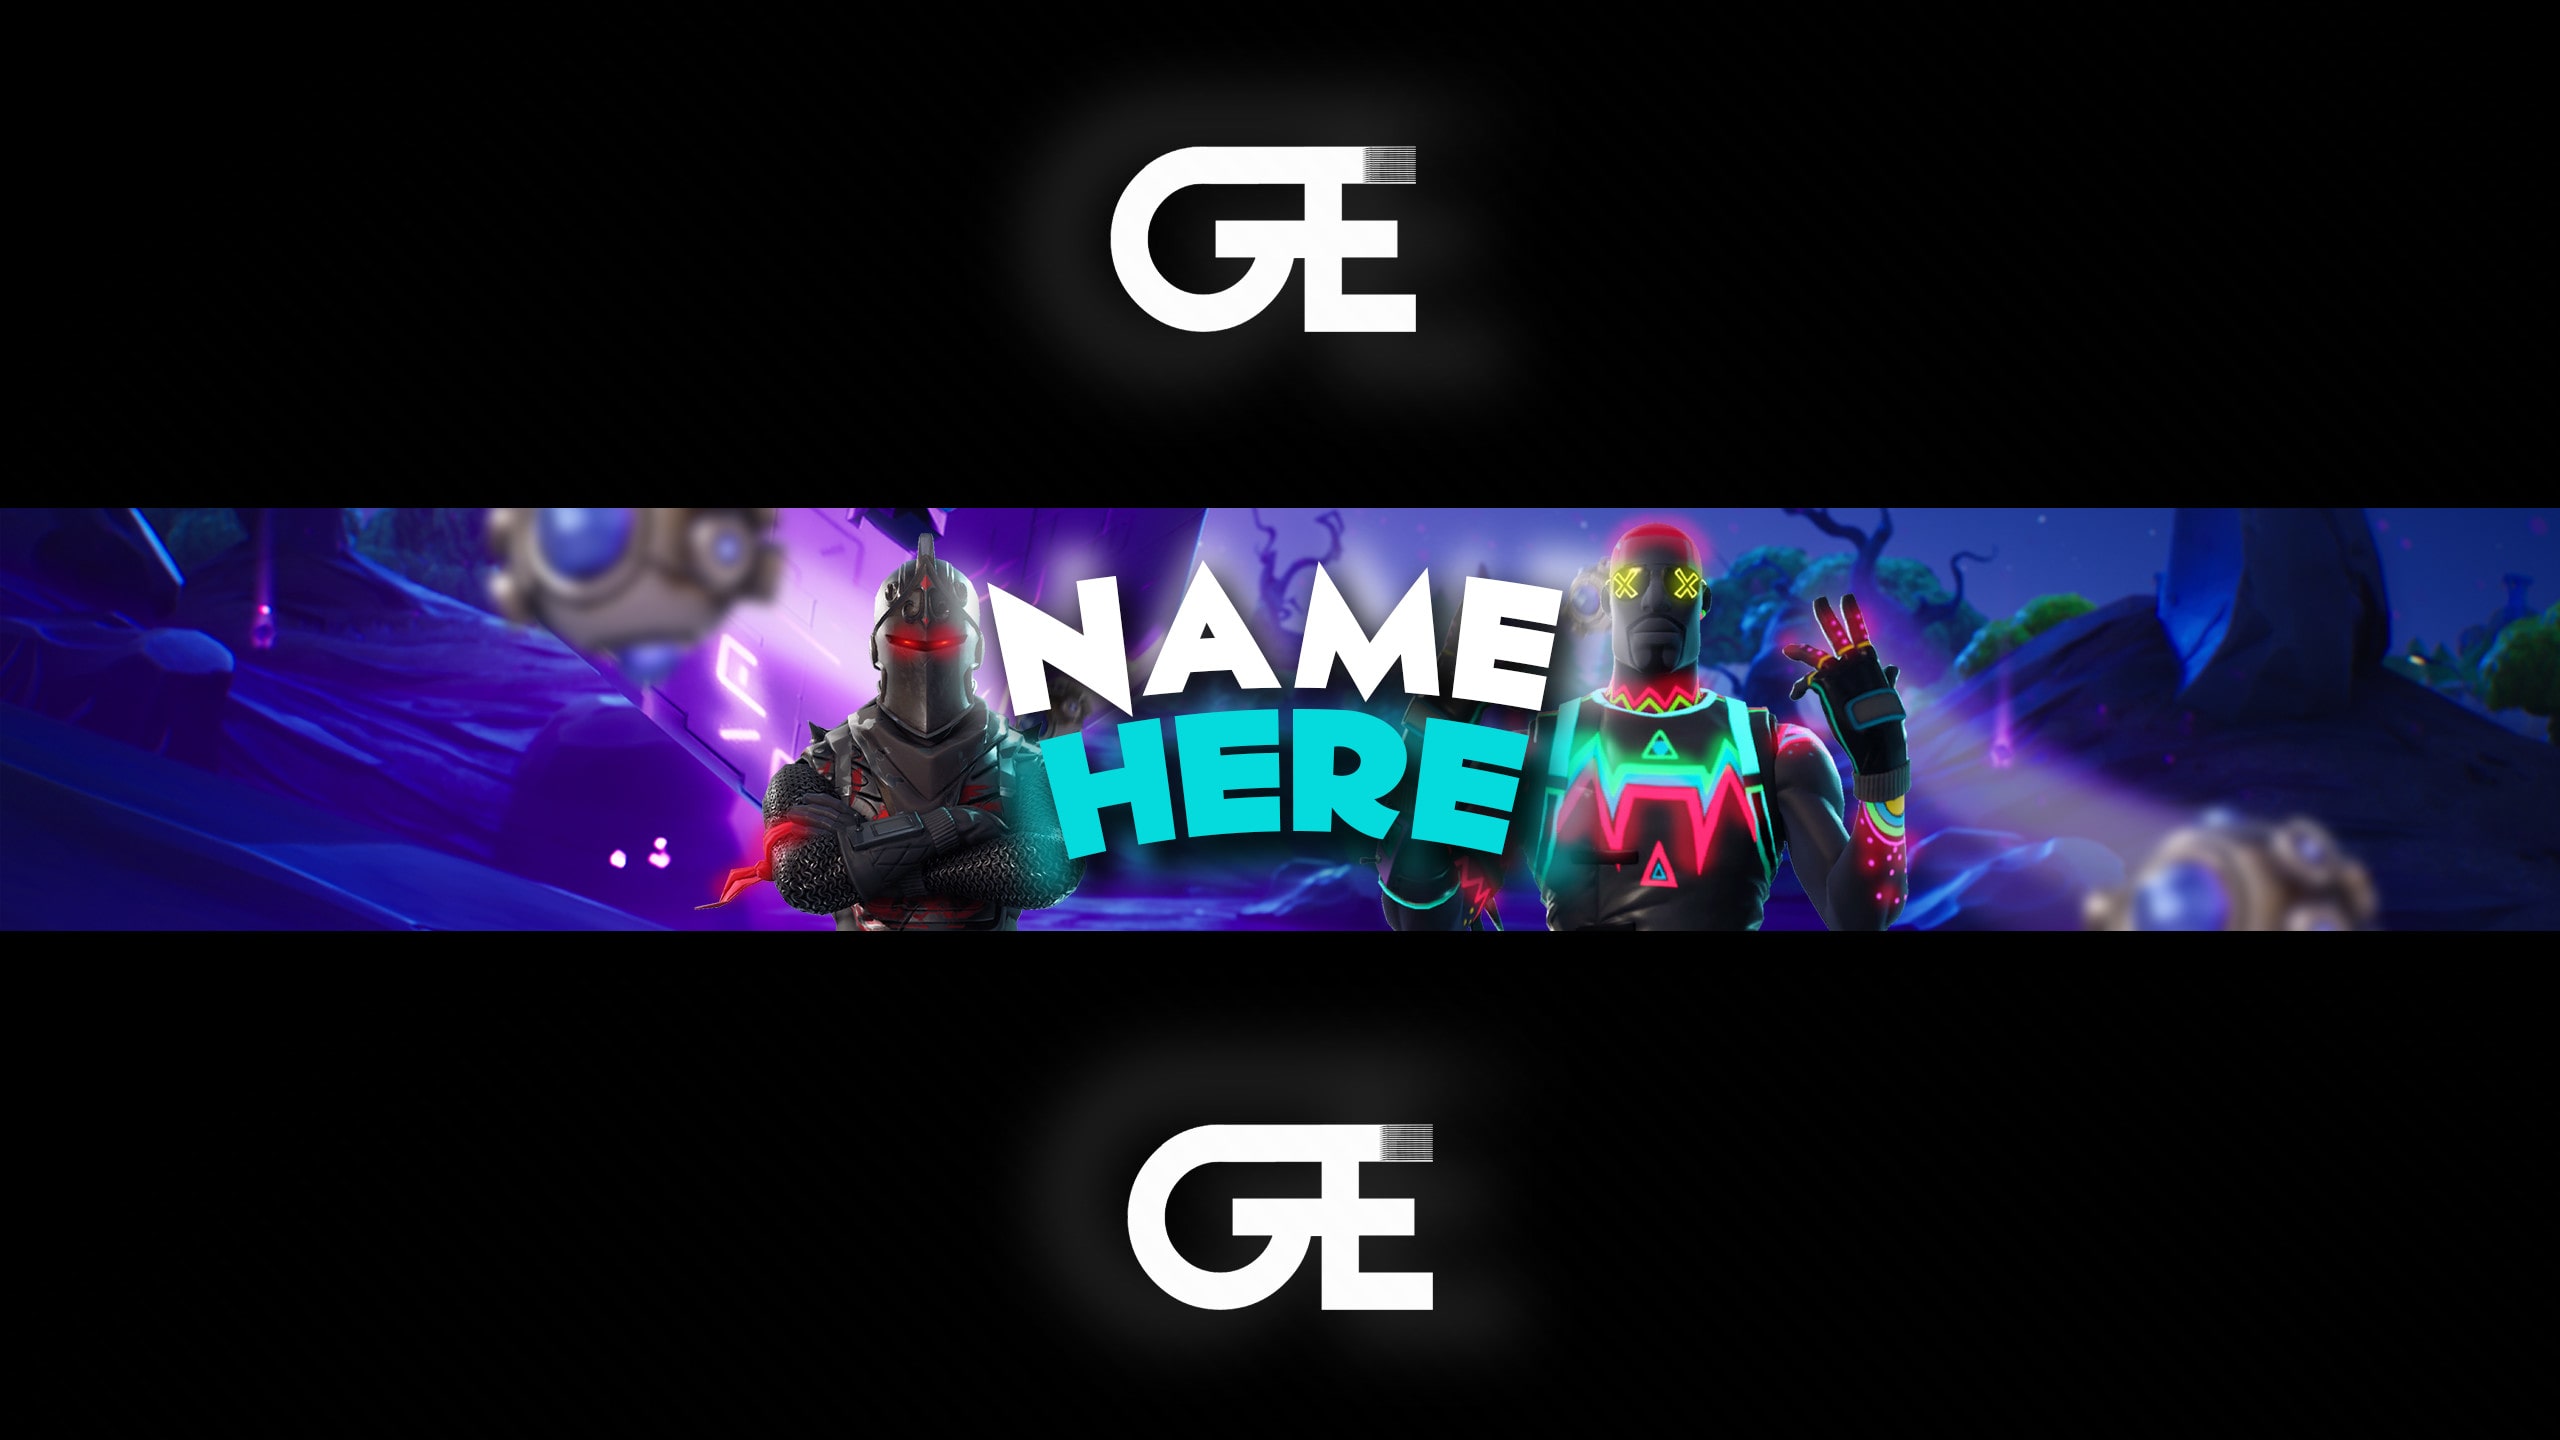 Fortnite Banners For Twitch - Best Banner Design 2018 - 2560 x 1440 jpeg 194kB